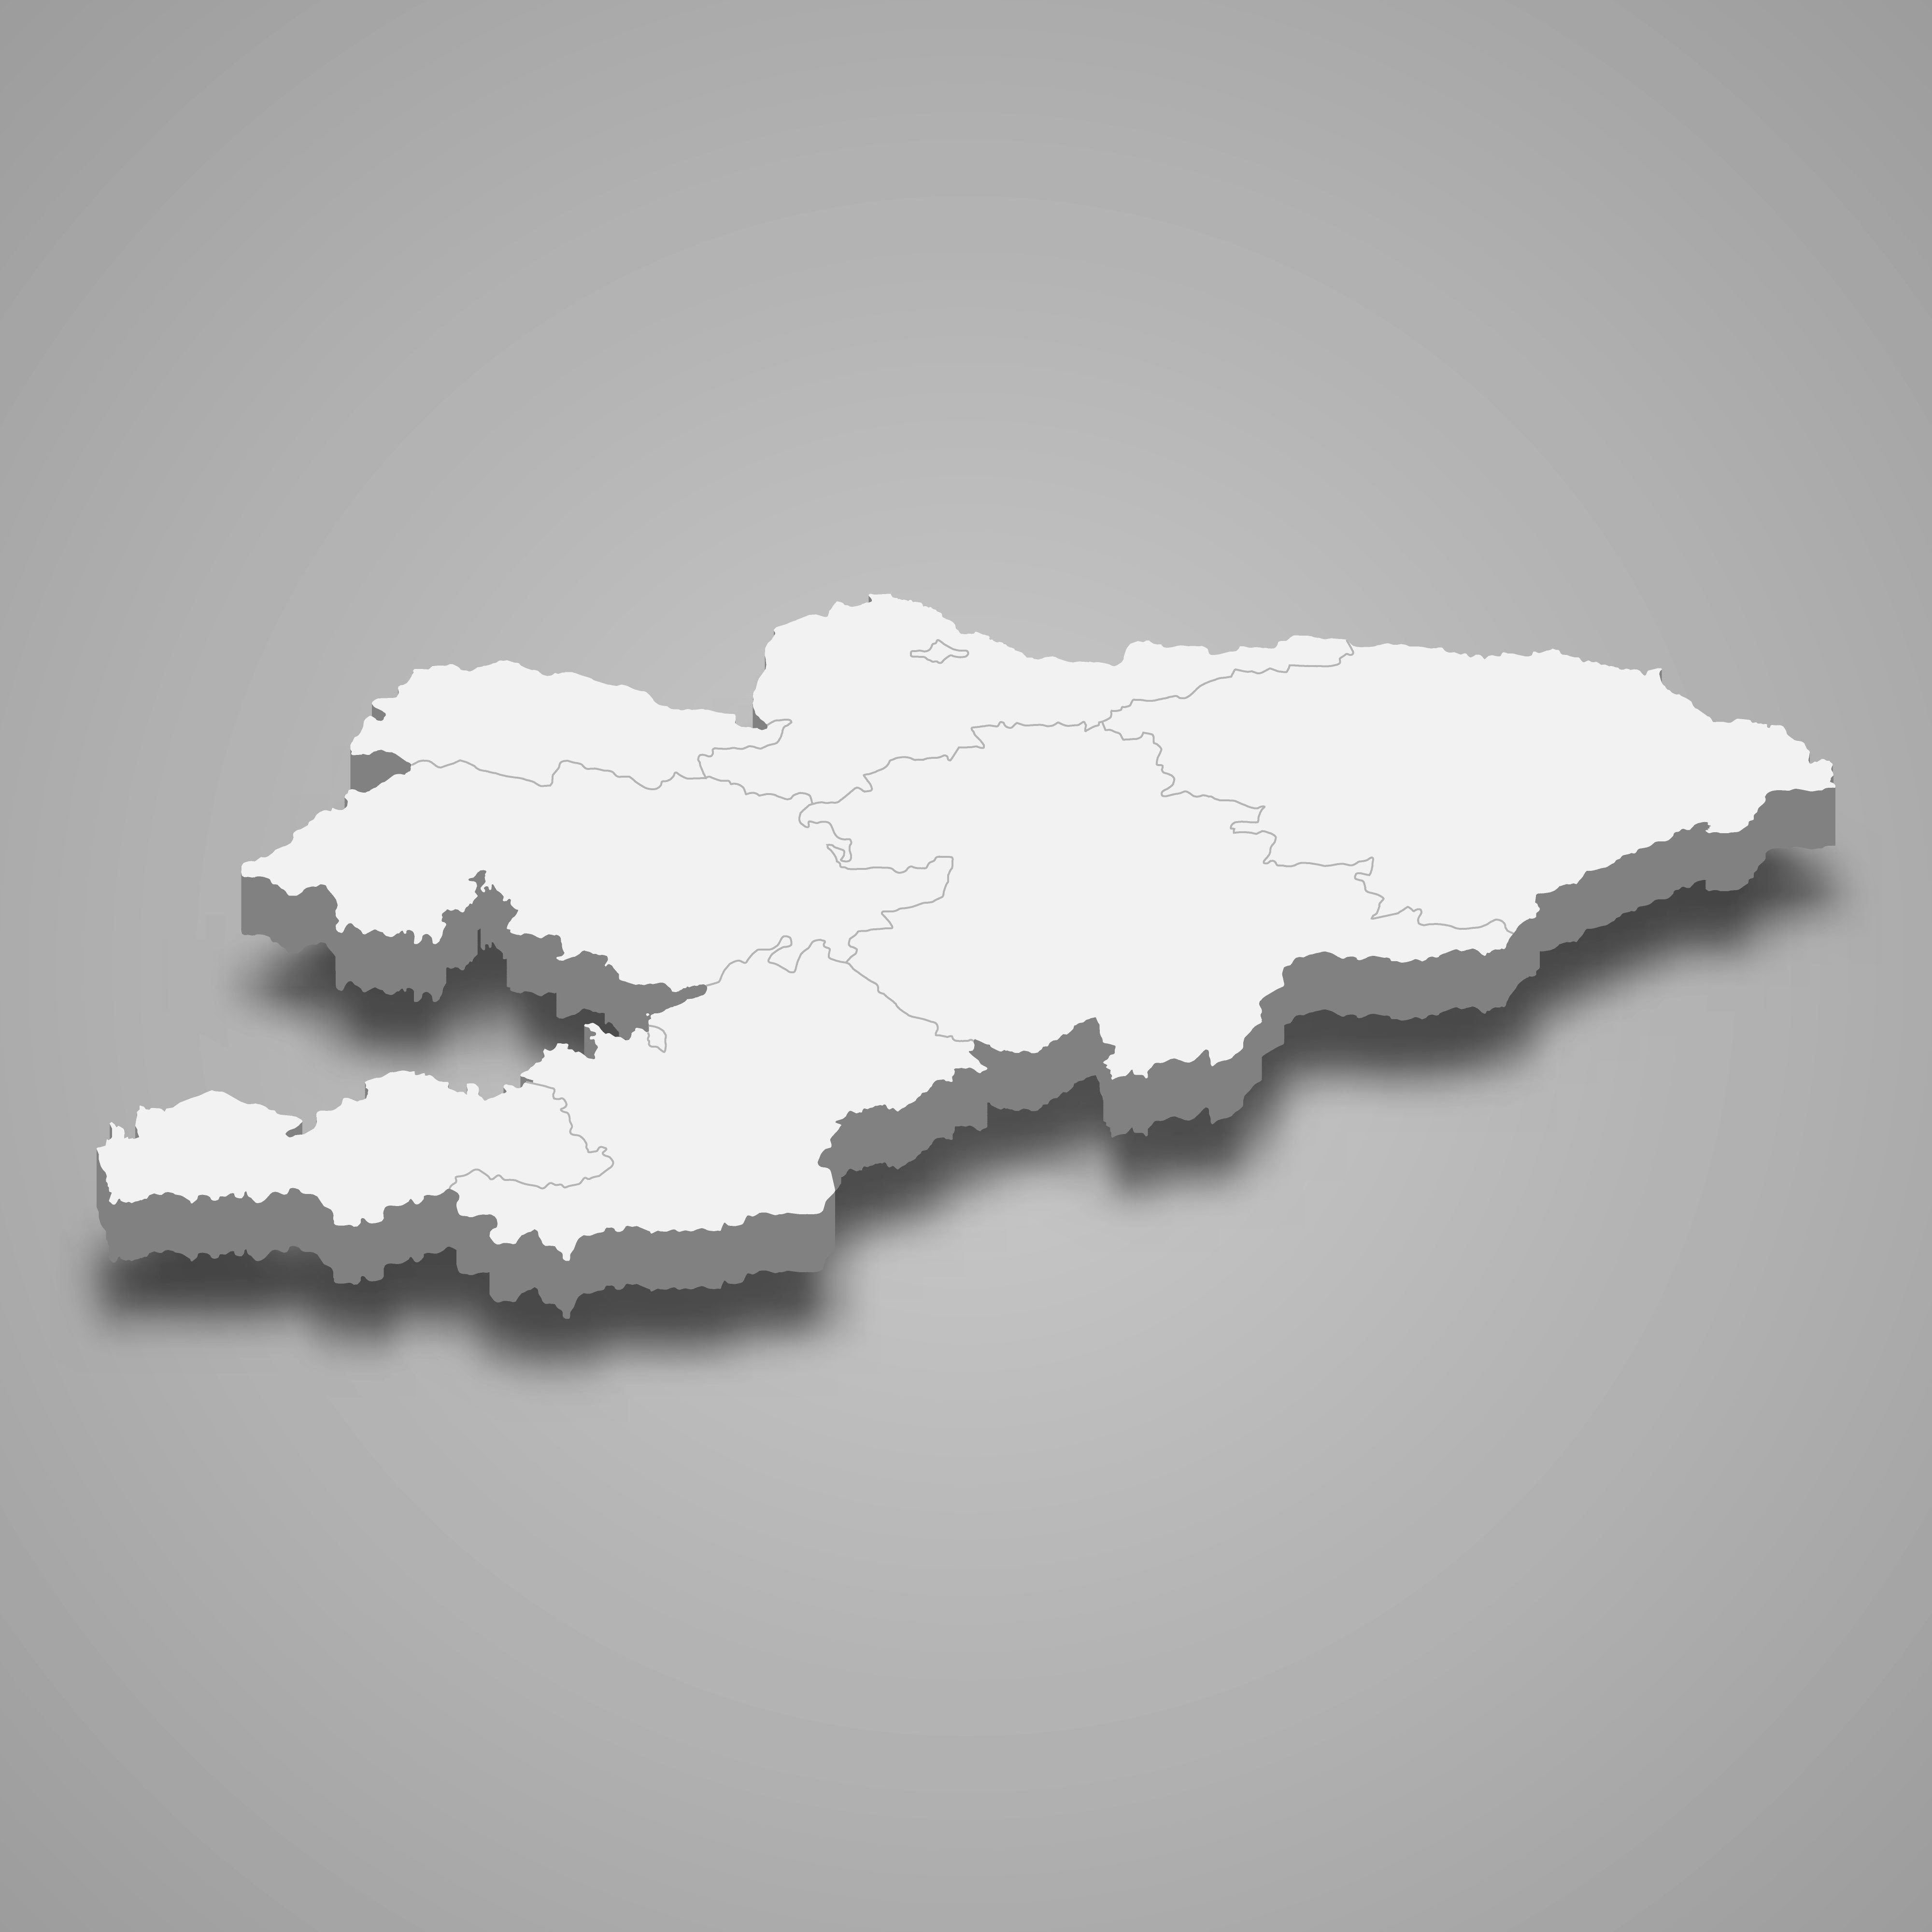 3d map of Kyrgyzstan with borders of regions. 3d map with borders Template for your design